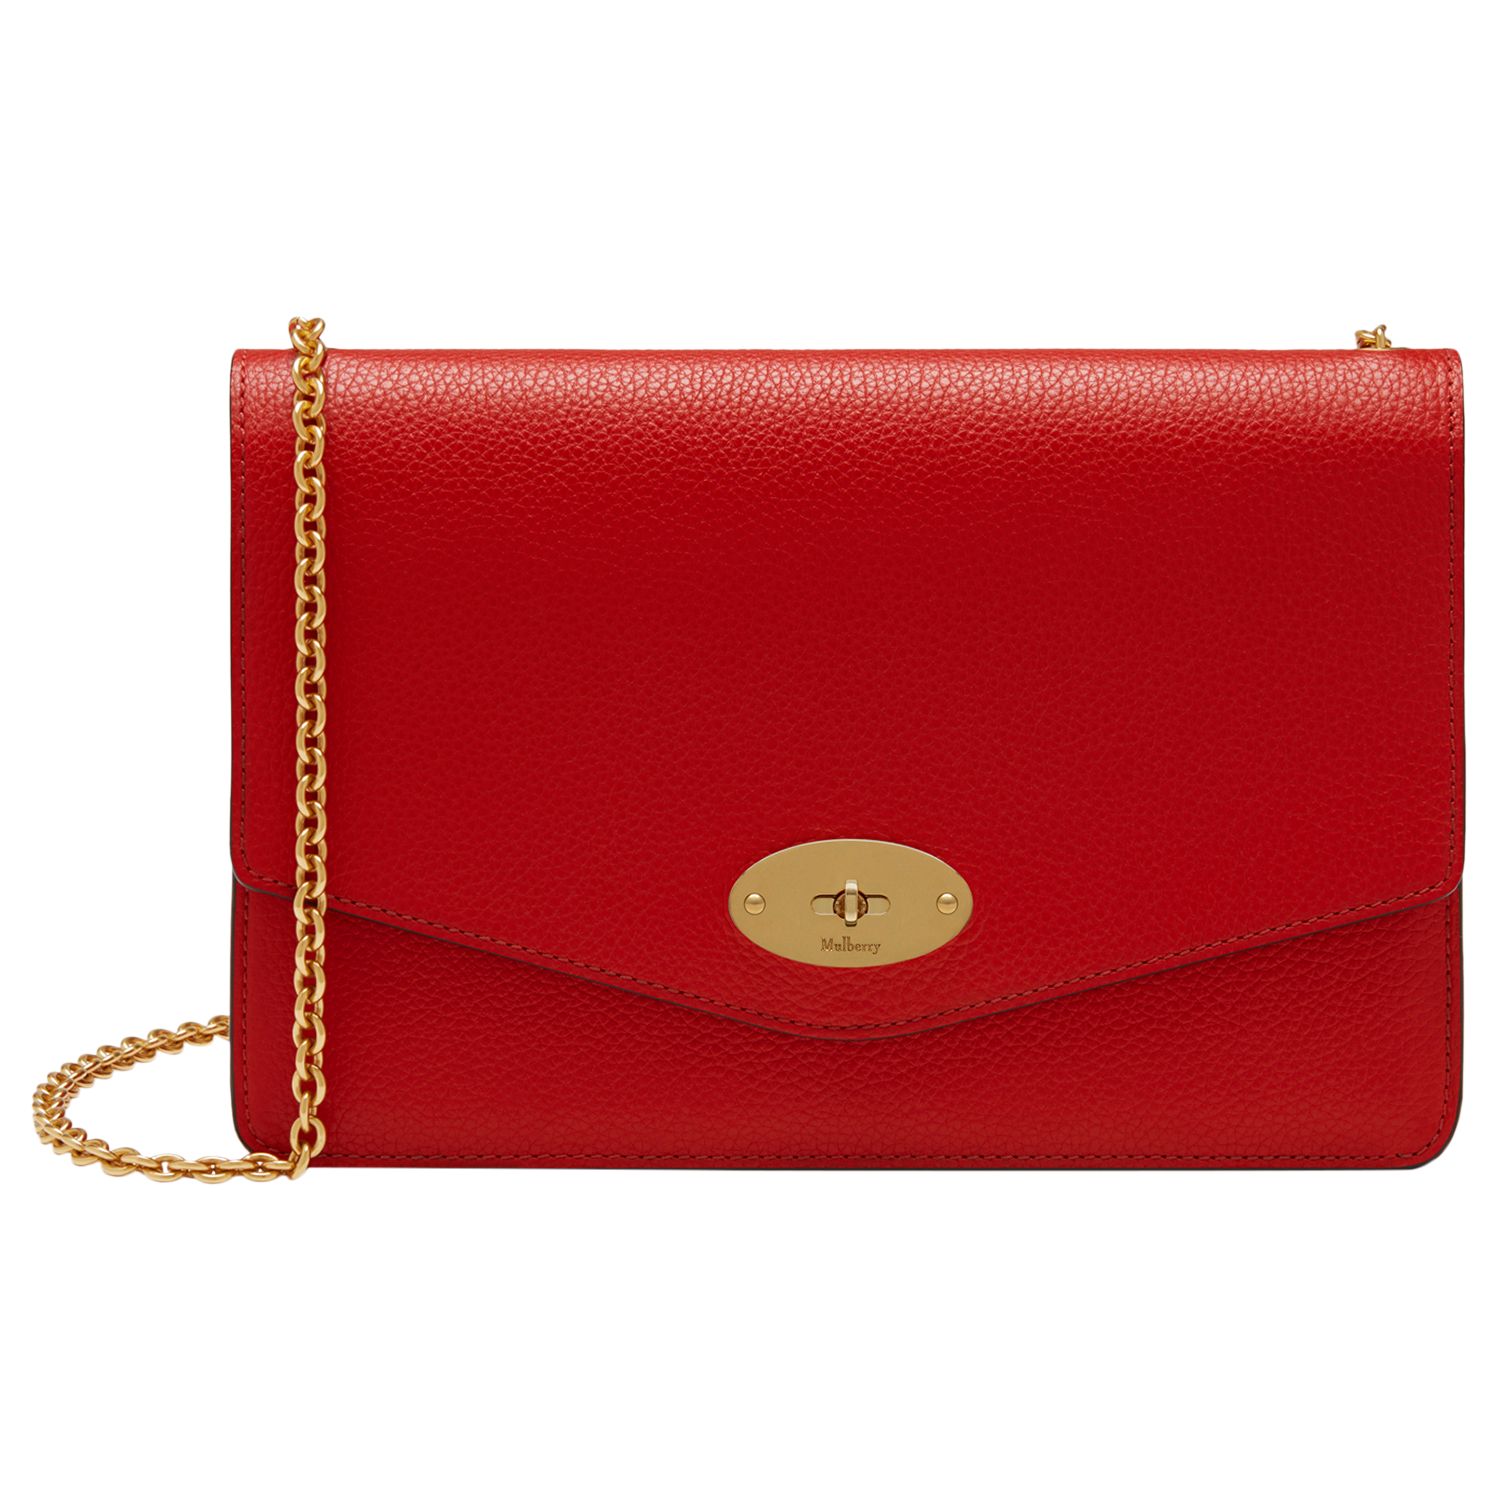 Mulberry Darley Grain Leather Bag